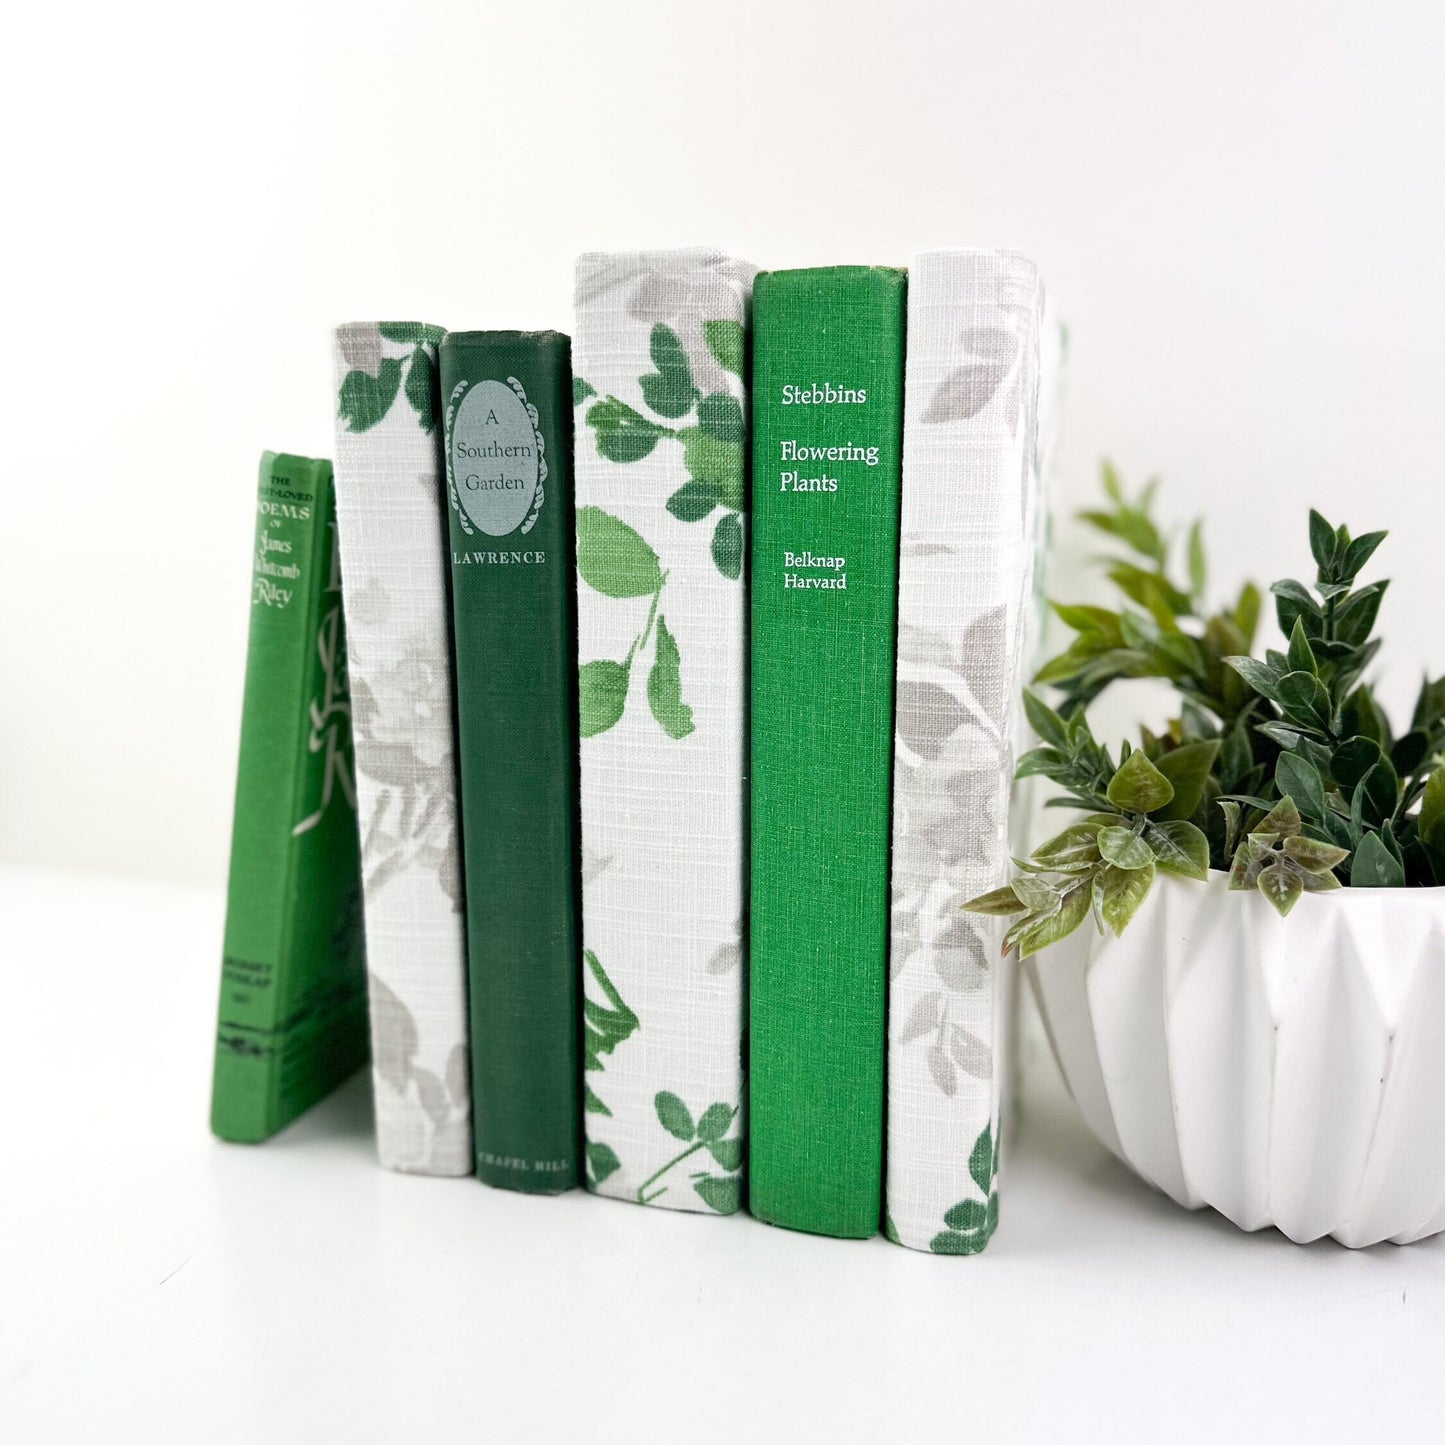 Green Decorative Books for Home Decor, Books by Color, Books by the Foot, Shelf Decor